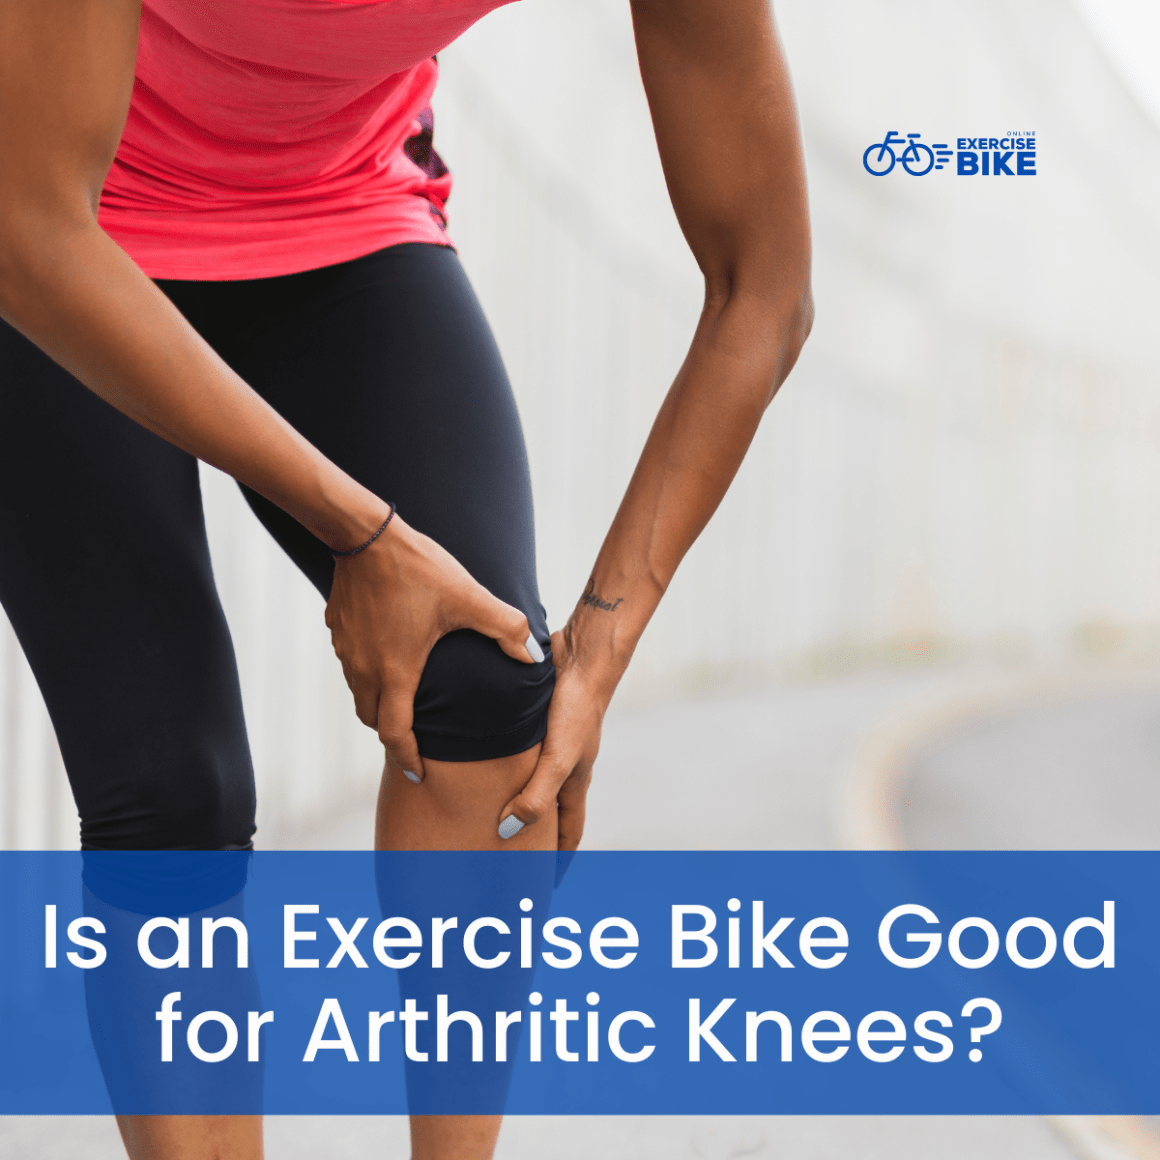 Is an Exercise Bike Good for Arthritic Knees?